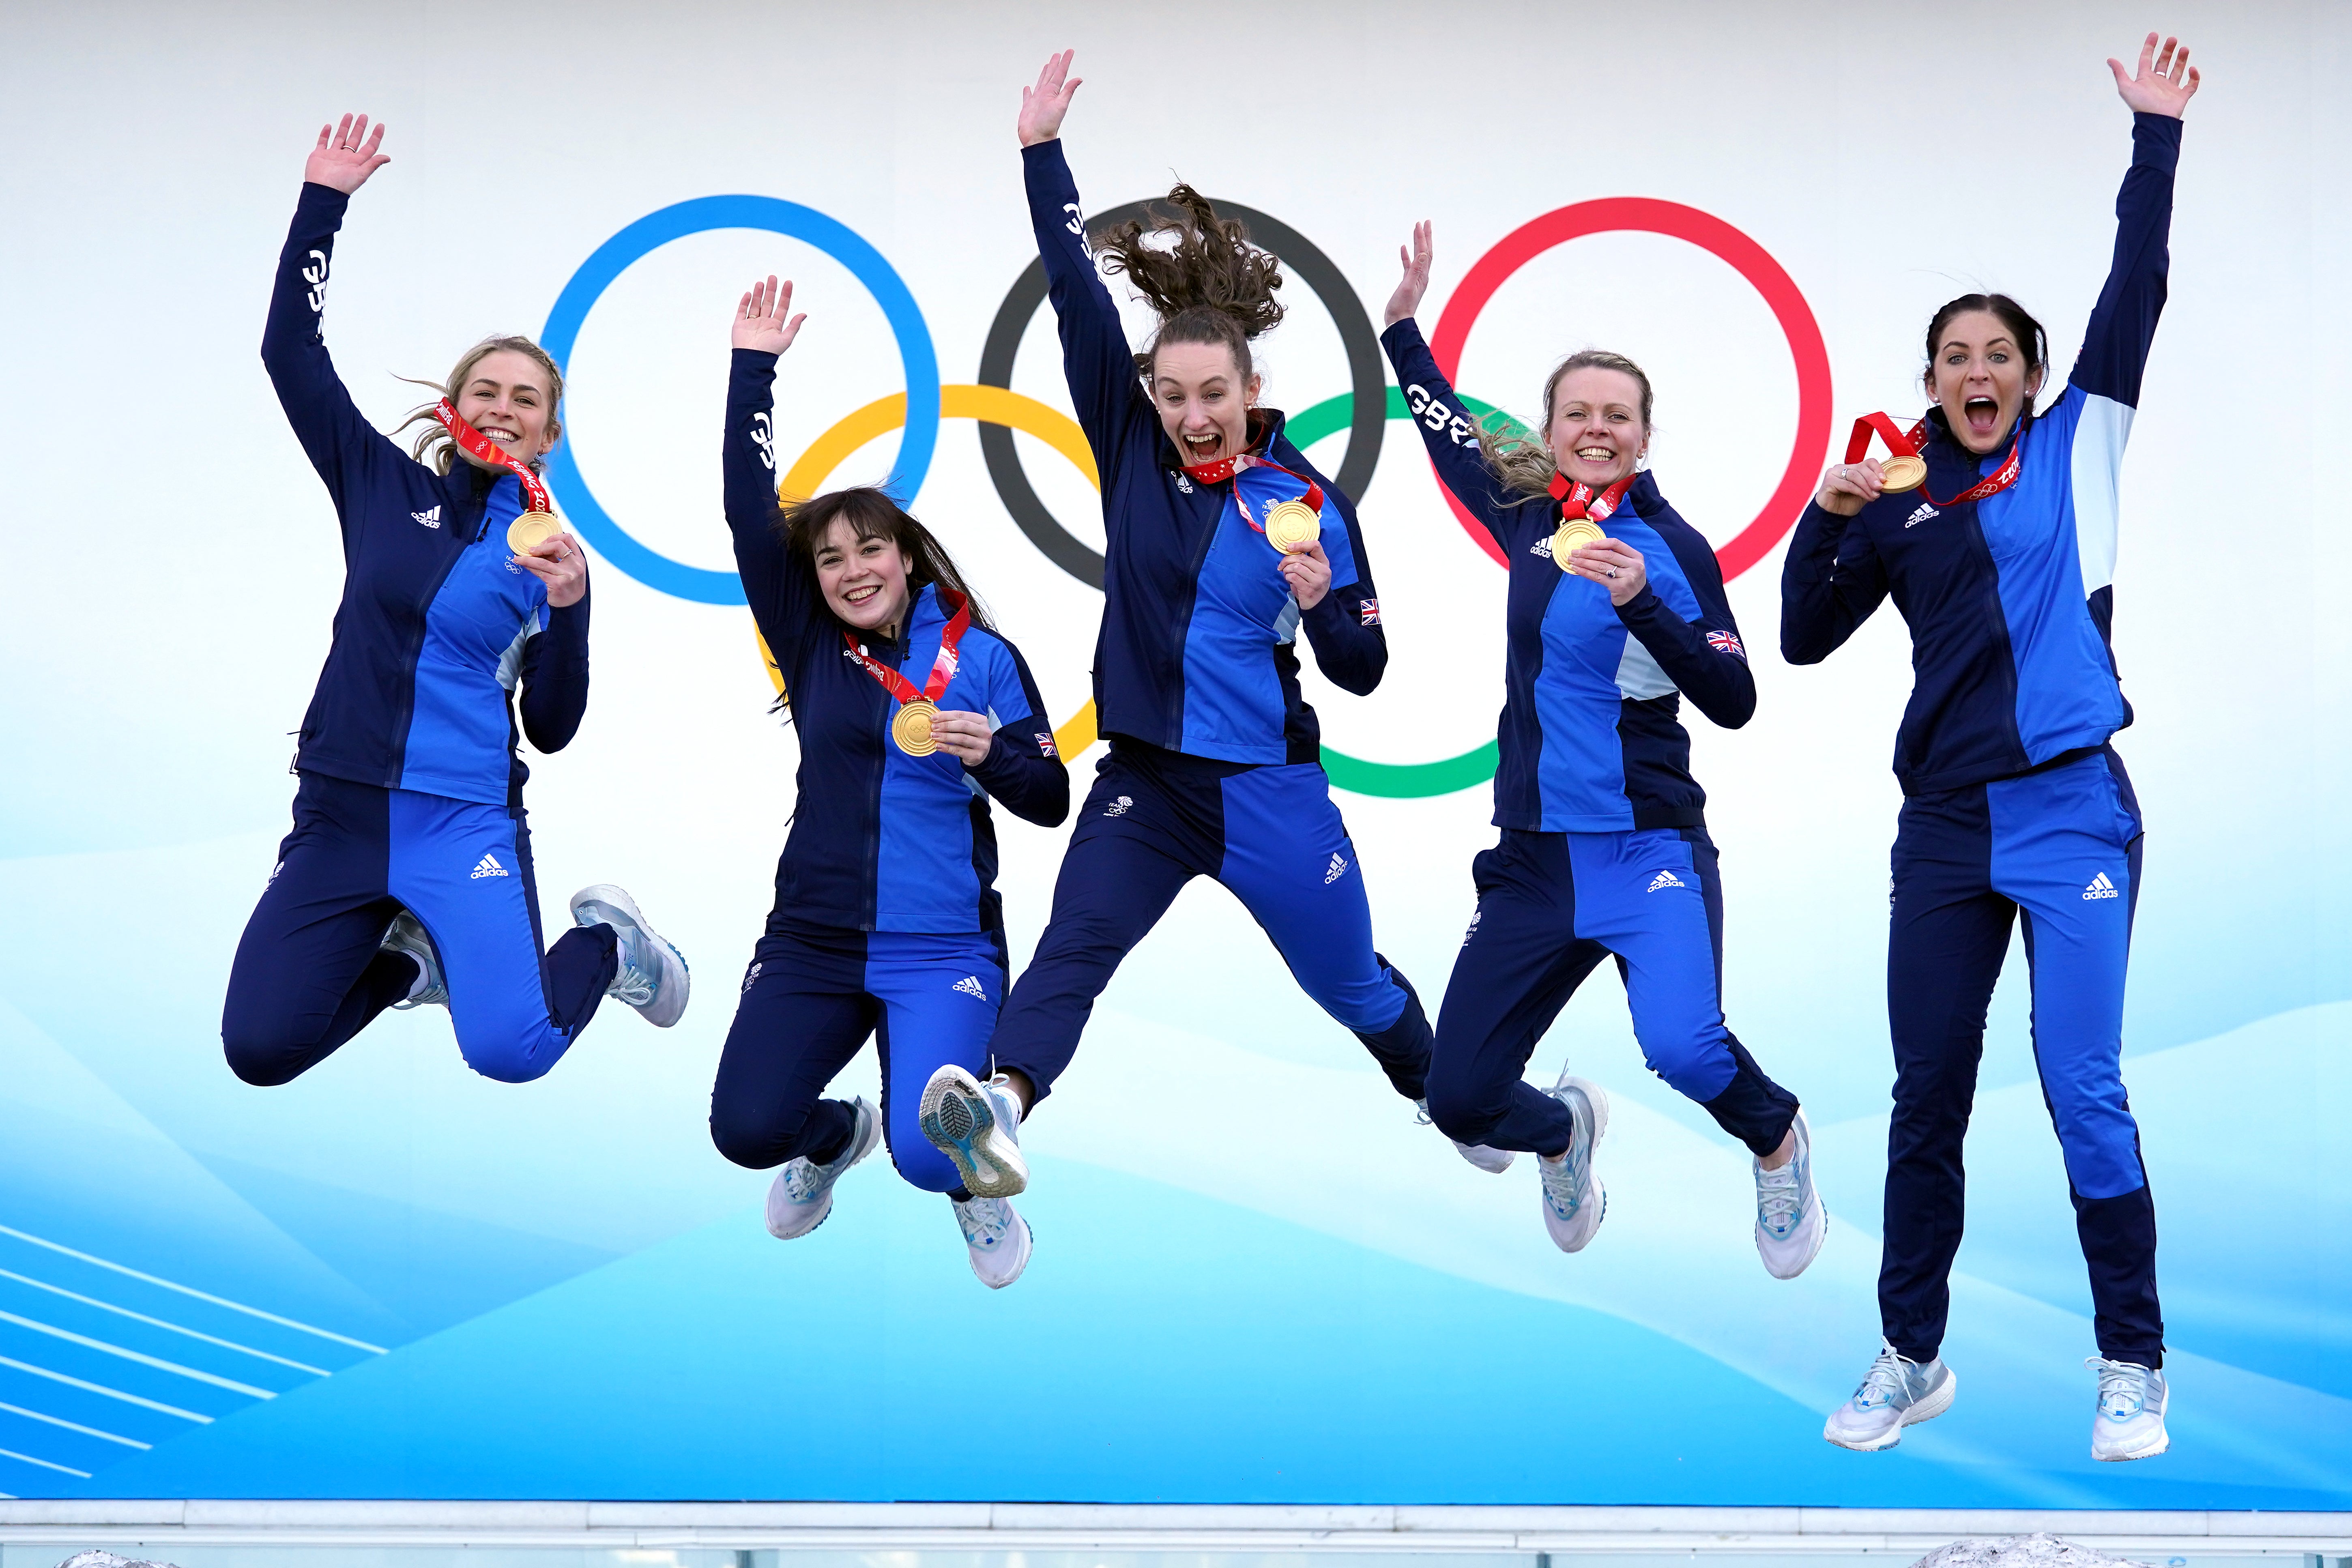 Great Britain’s Mili Smith, Hailey Duff, Jennifer Dodds, Vicky Wright and Eve Muirhead celebrate curling gold medal success at the 2022 Winter Olympic Games